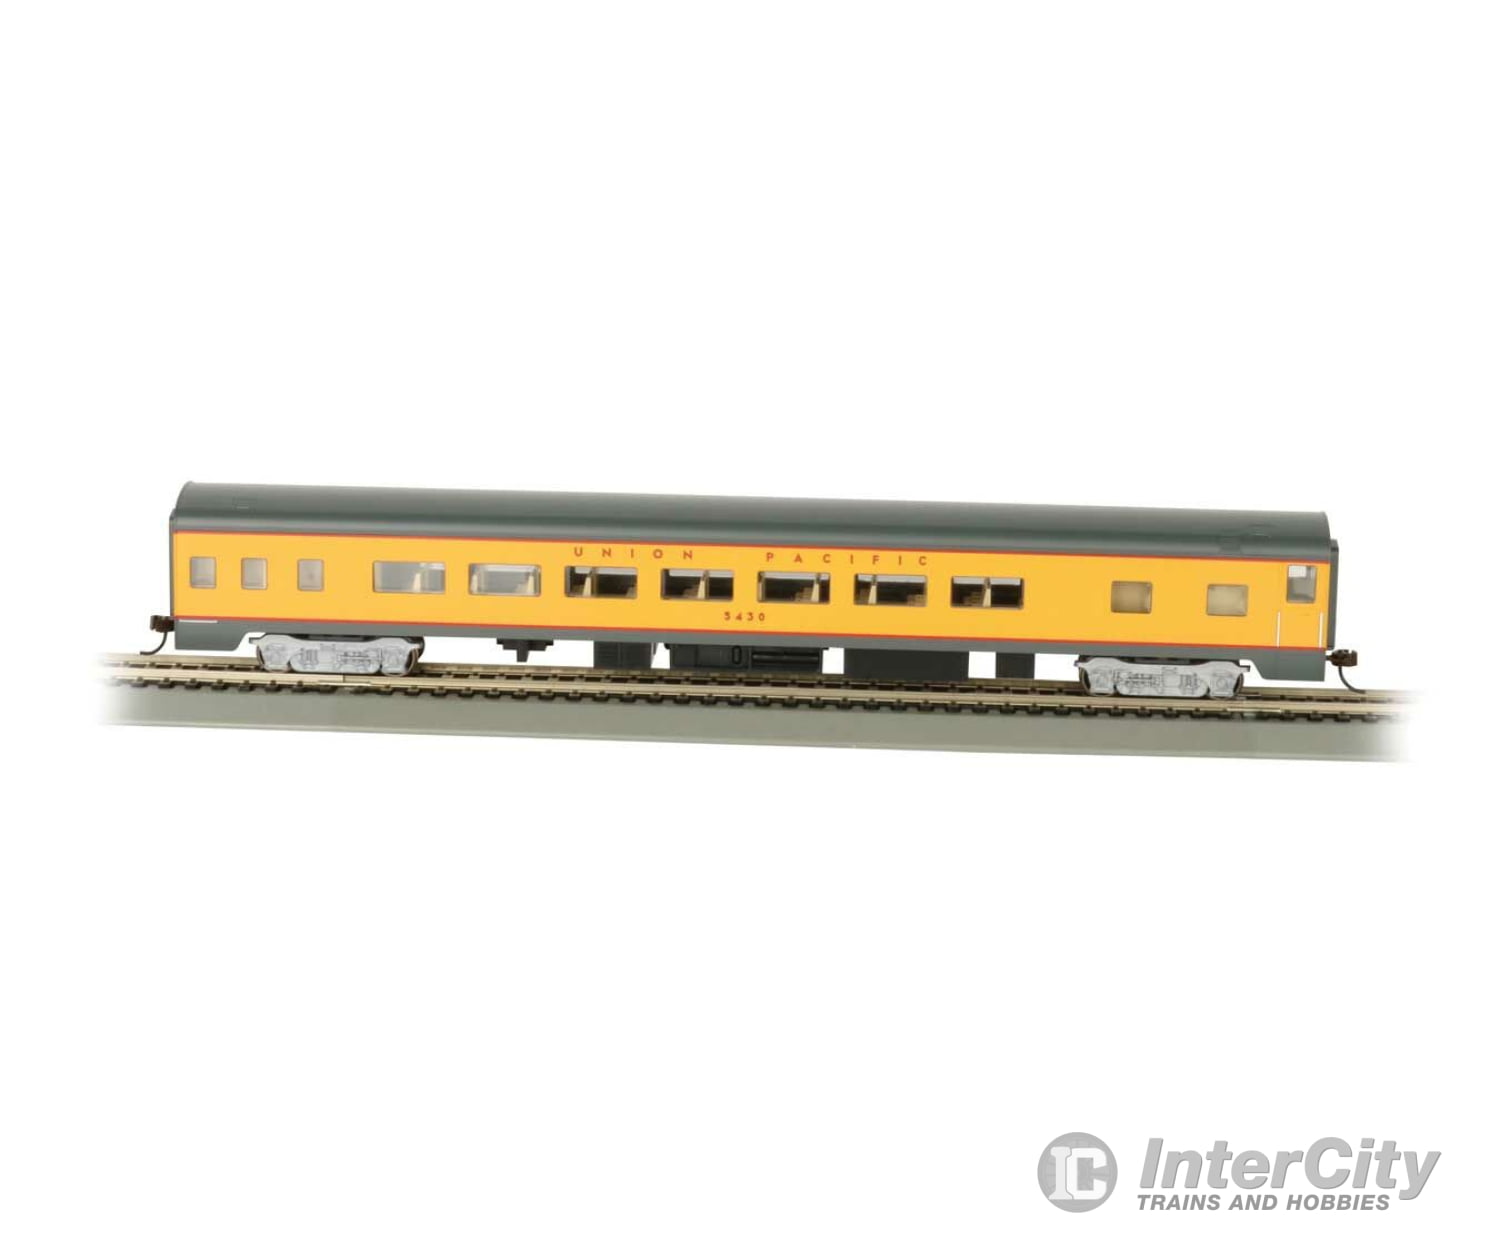 Bachmann 14204 85 Smooth-Side Coach W/Lights - Ready To Run -- Union Pacific Passenger Cars